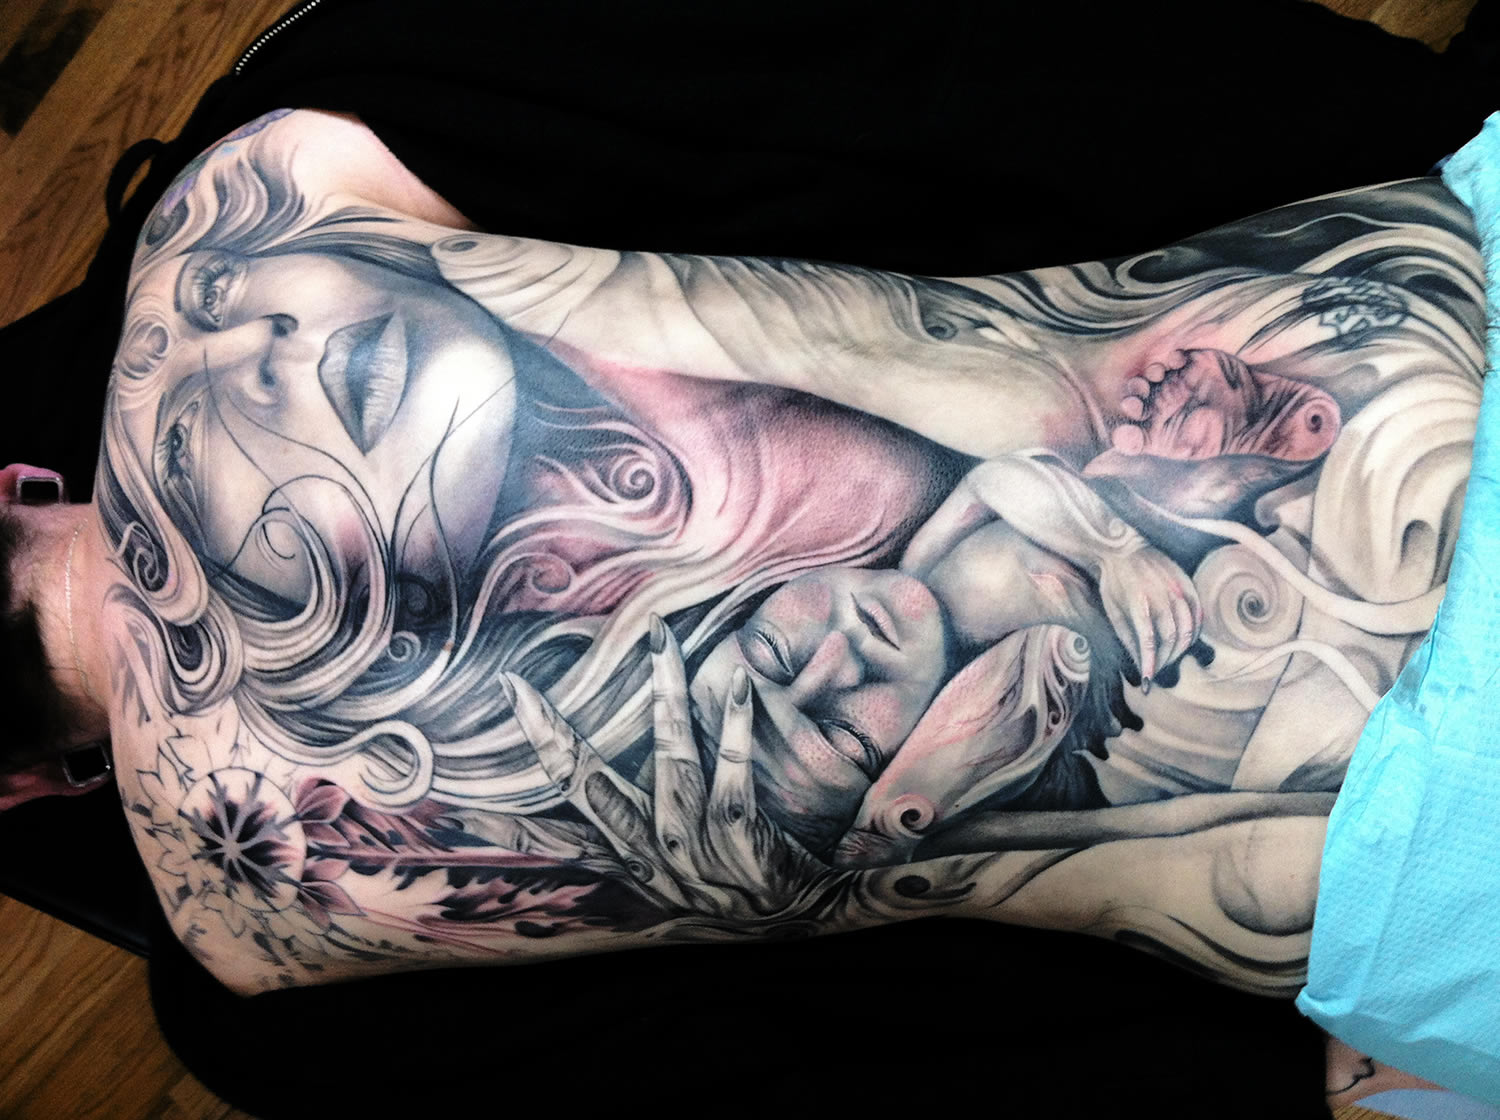 tattoo of woman and child on back, by tony mancia